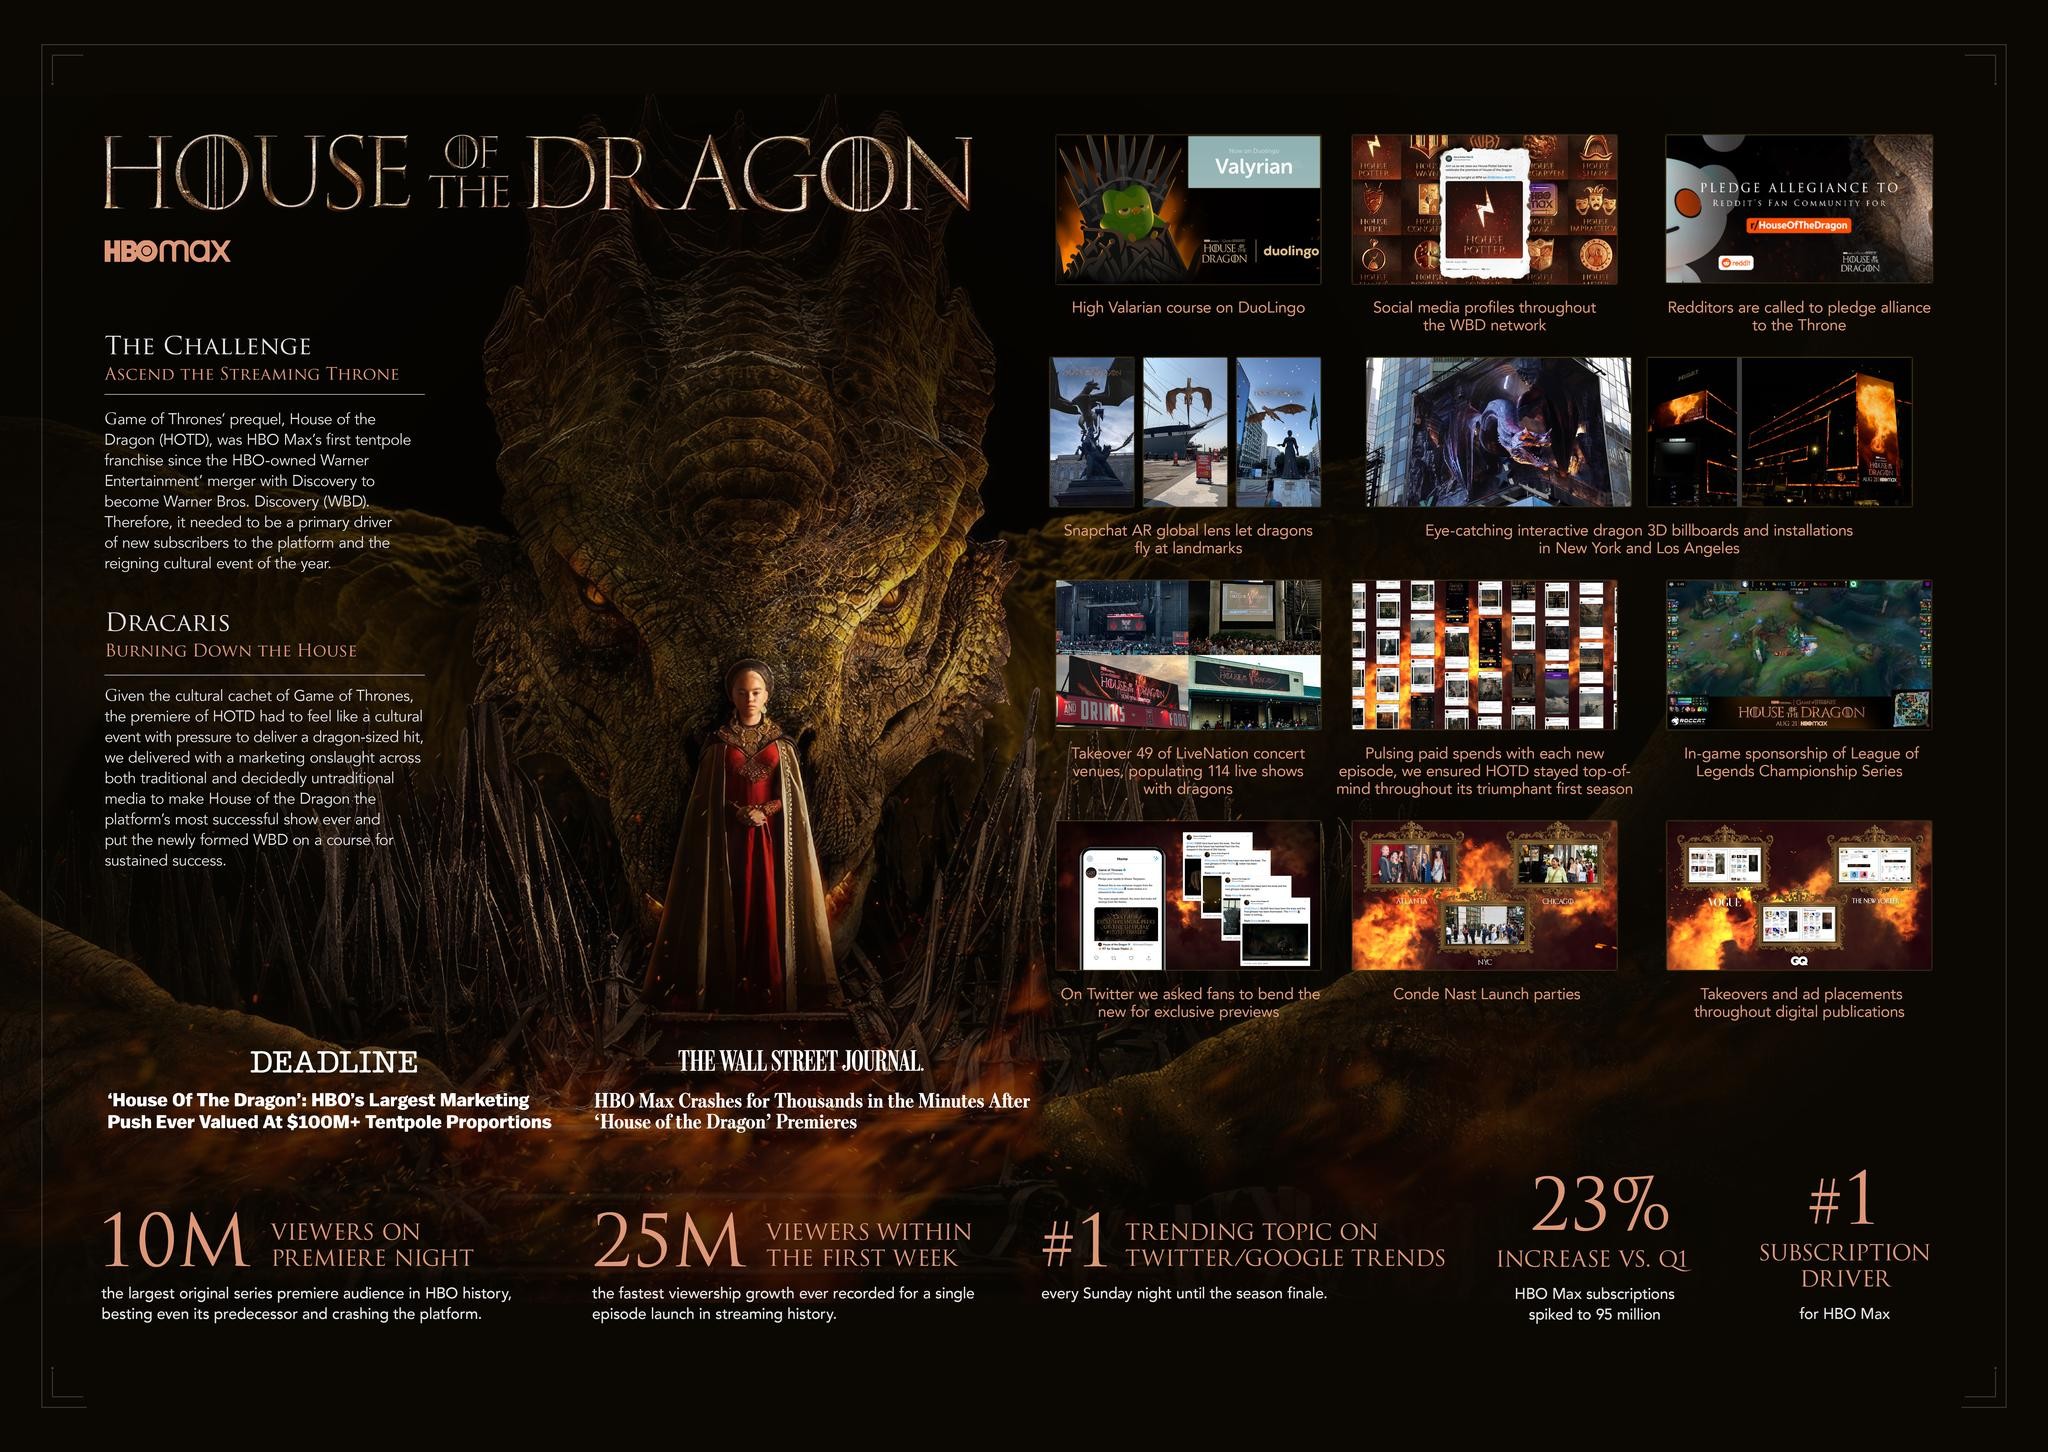 HOUSE OF THE DRAGON US LAUNCH